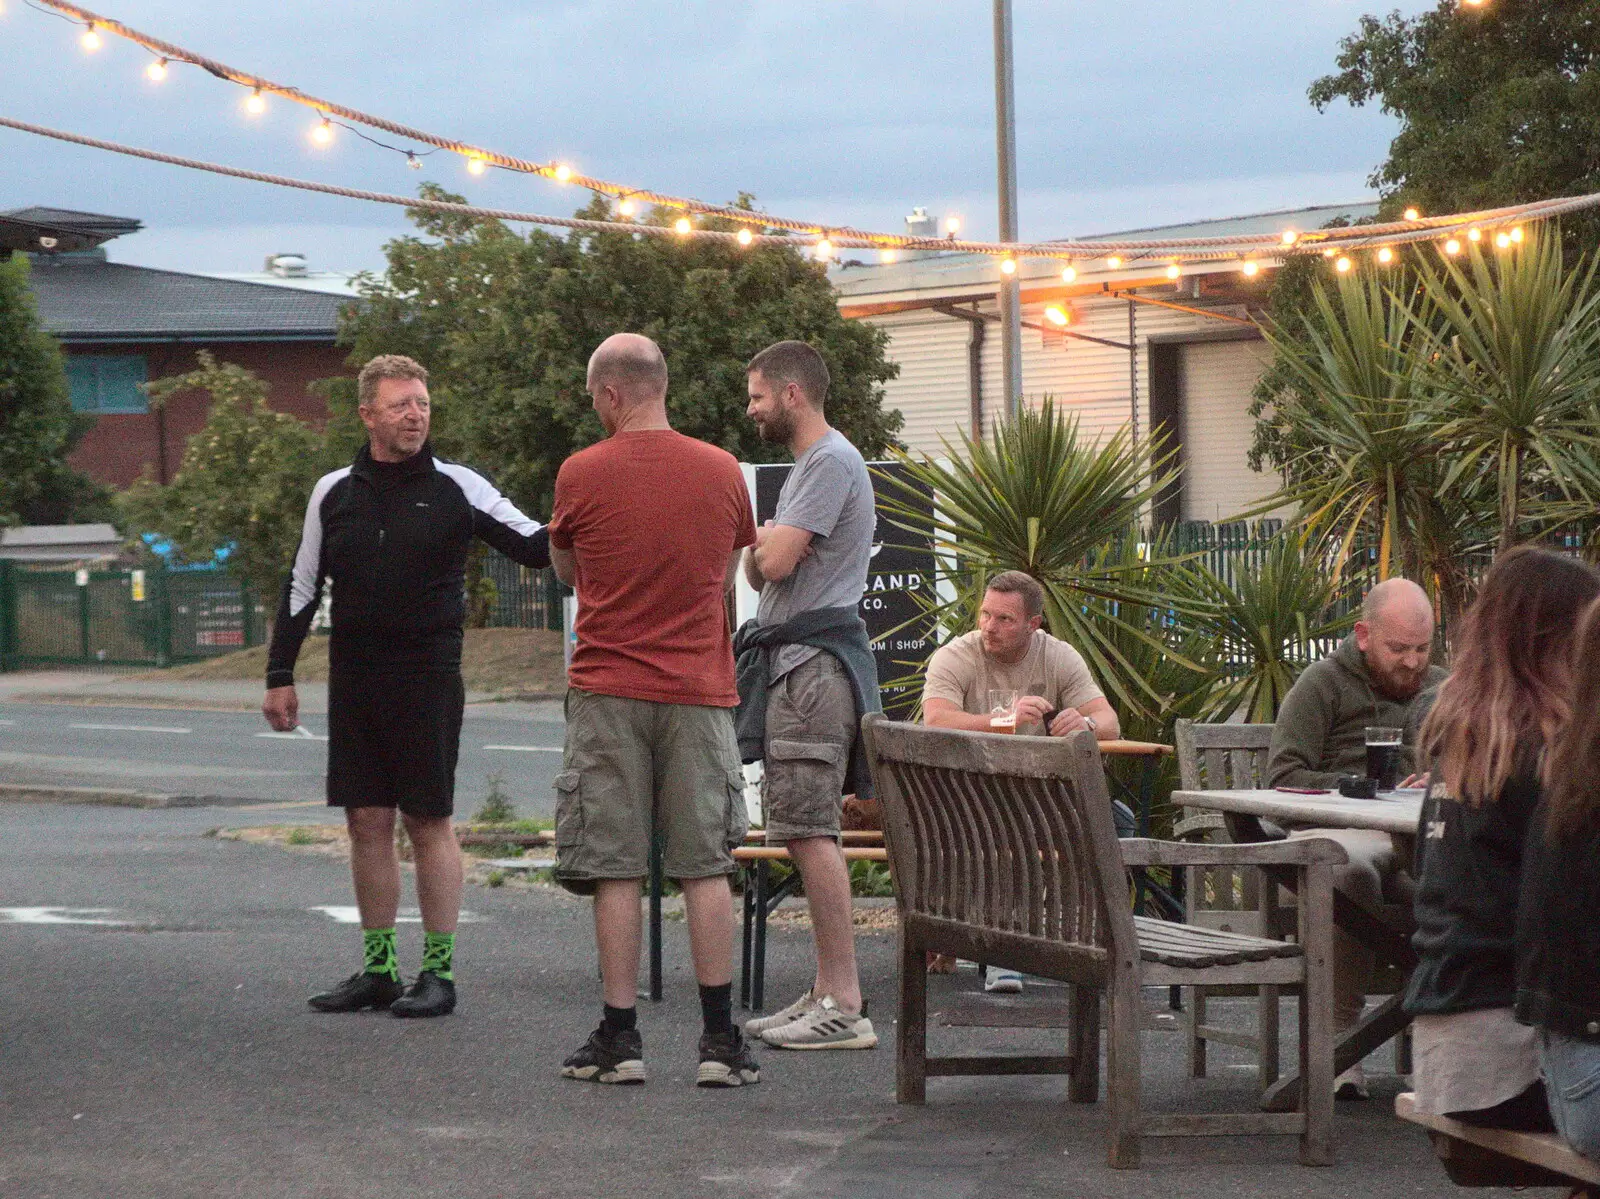 The lads chat in the 'beer garden', from The BSCC at The Crown, Dickleburgh, Norfolk - 19th August 2021